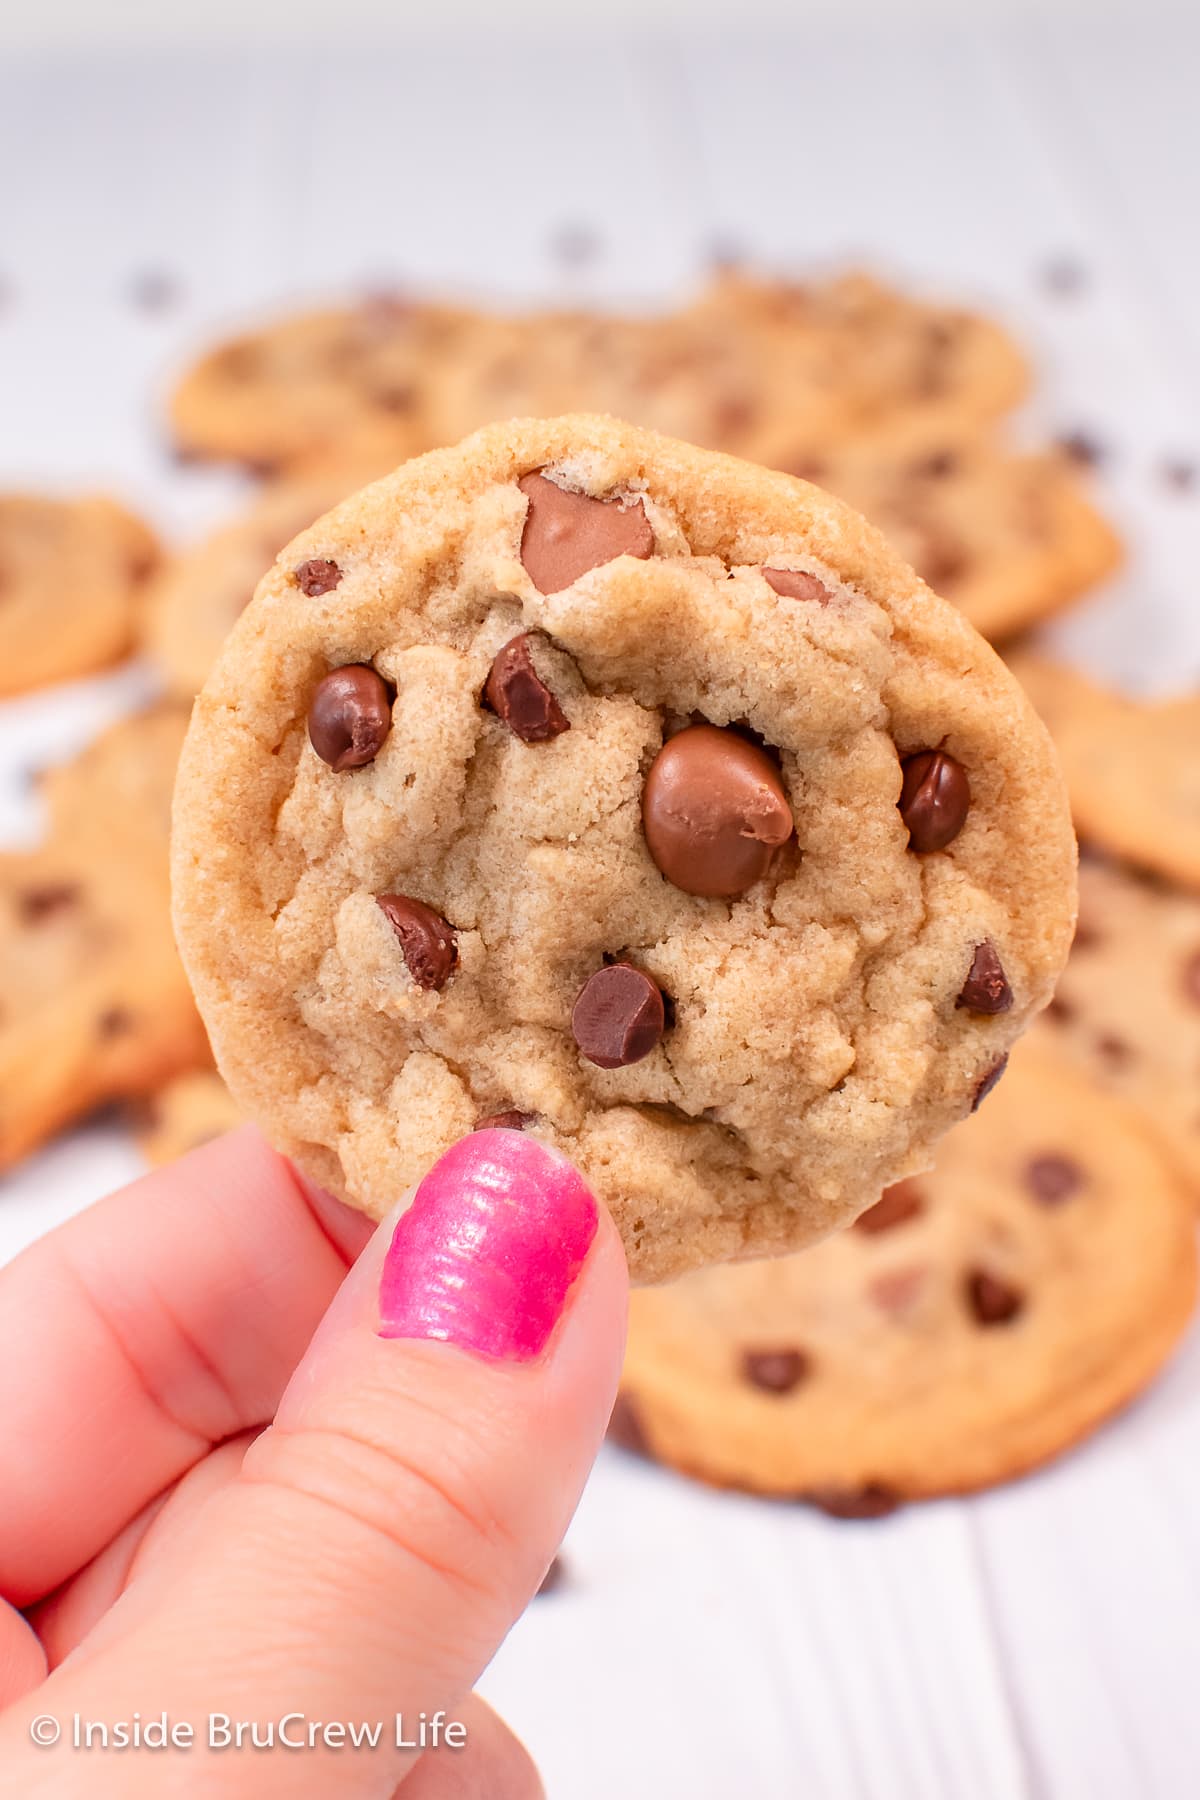 A hand holding up a chocolate chip cookie.